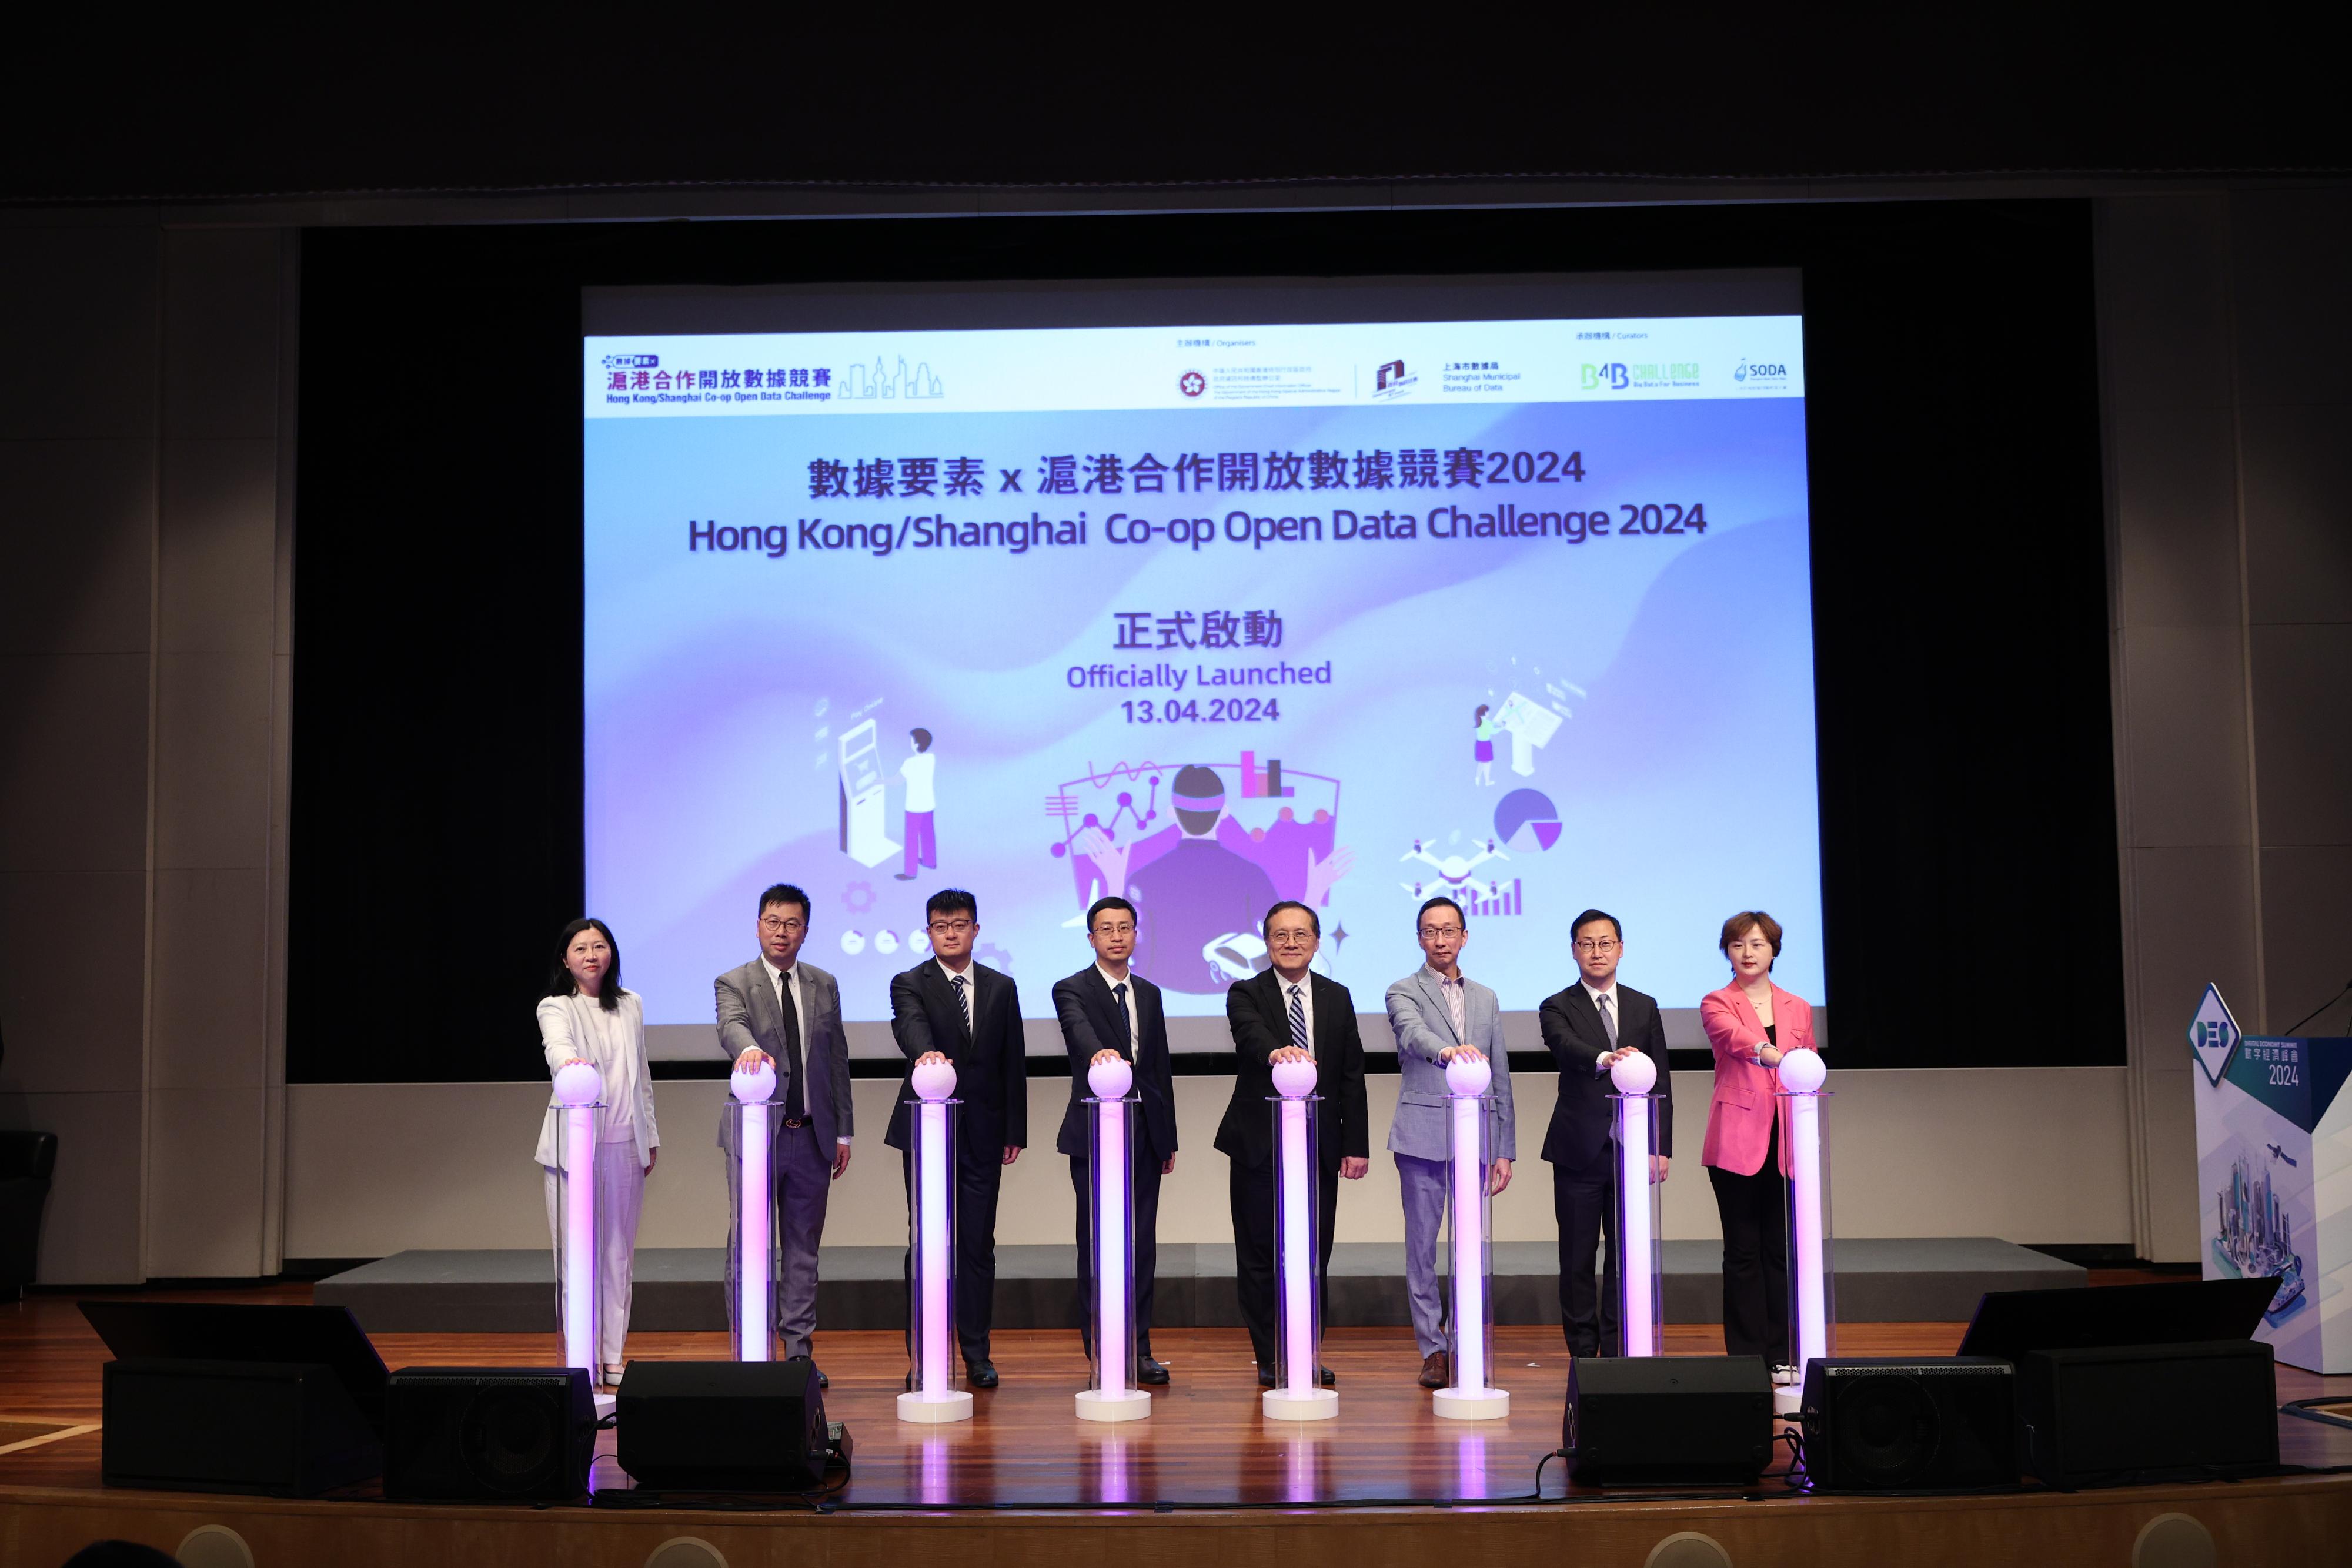 The Deputy Government Chief Information Officer, Mr Kingsley Wong (fourth right); the Deputy Director of Shanghai Municipal Bureau of Data, Dr Shao Jun (fourth left) and other guests attend the Hong Kong/Shanghai Co-operation Open Data Challenge 2024 kick-off ceremony on April 13.